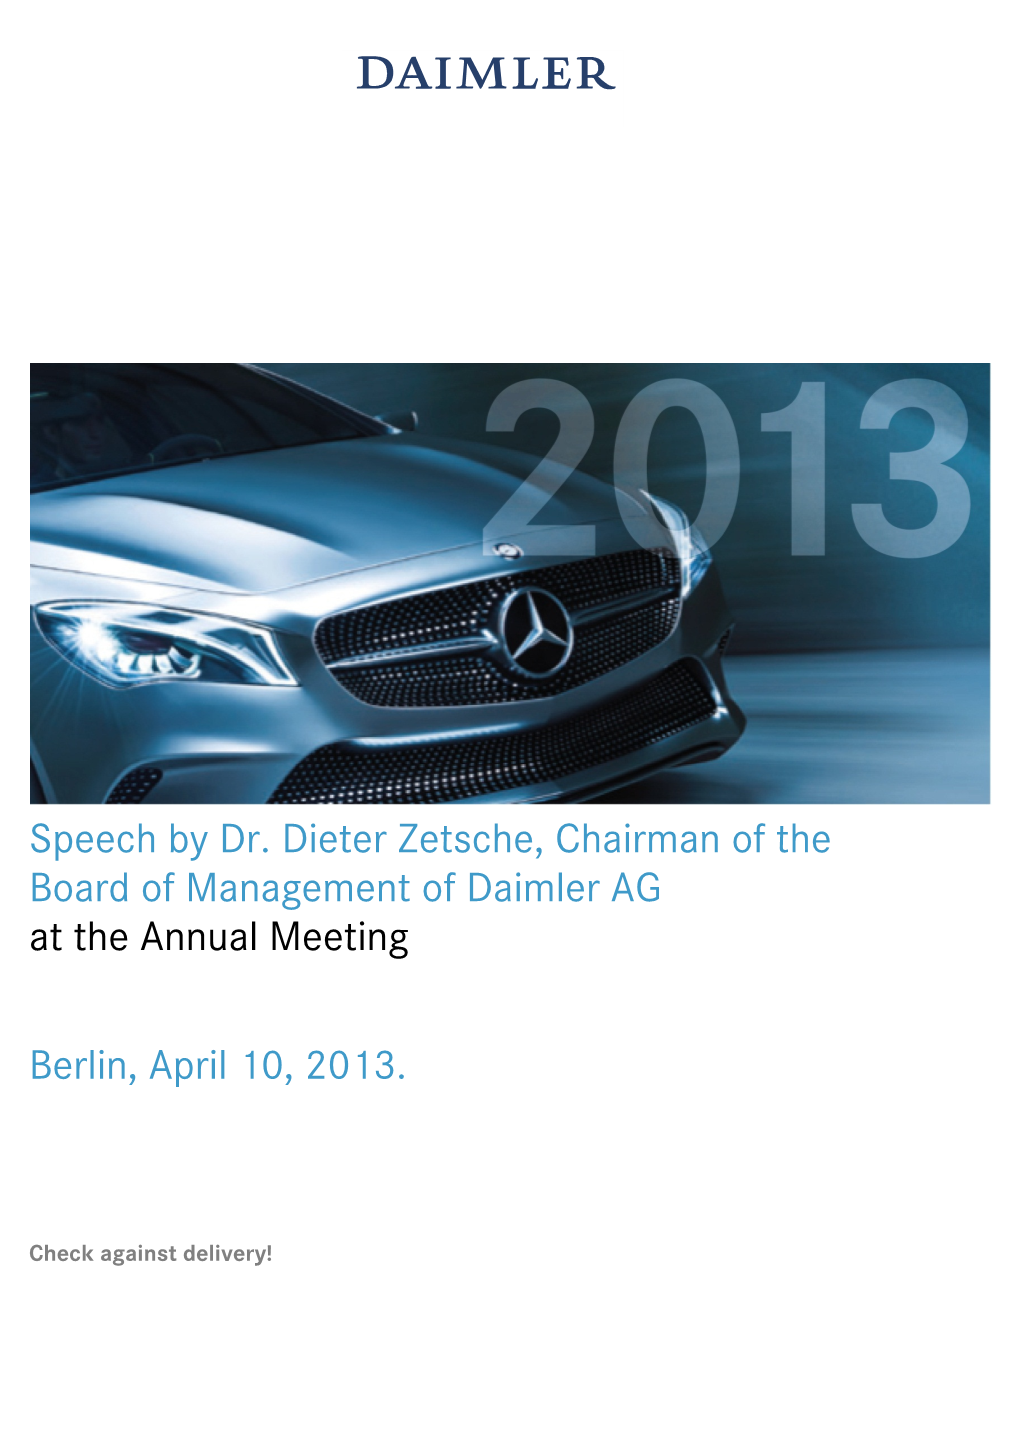 Speech by Dr. Dieter Zetsche, Chairman of the Board of Management of Daimler AG at the Annual Meeting